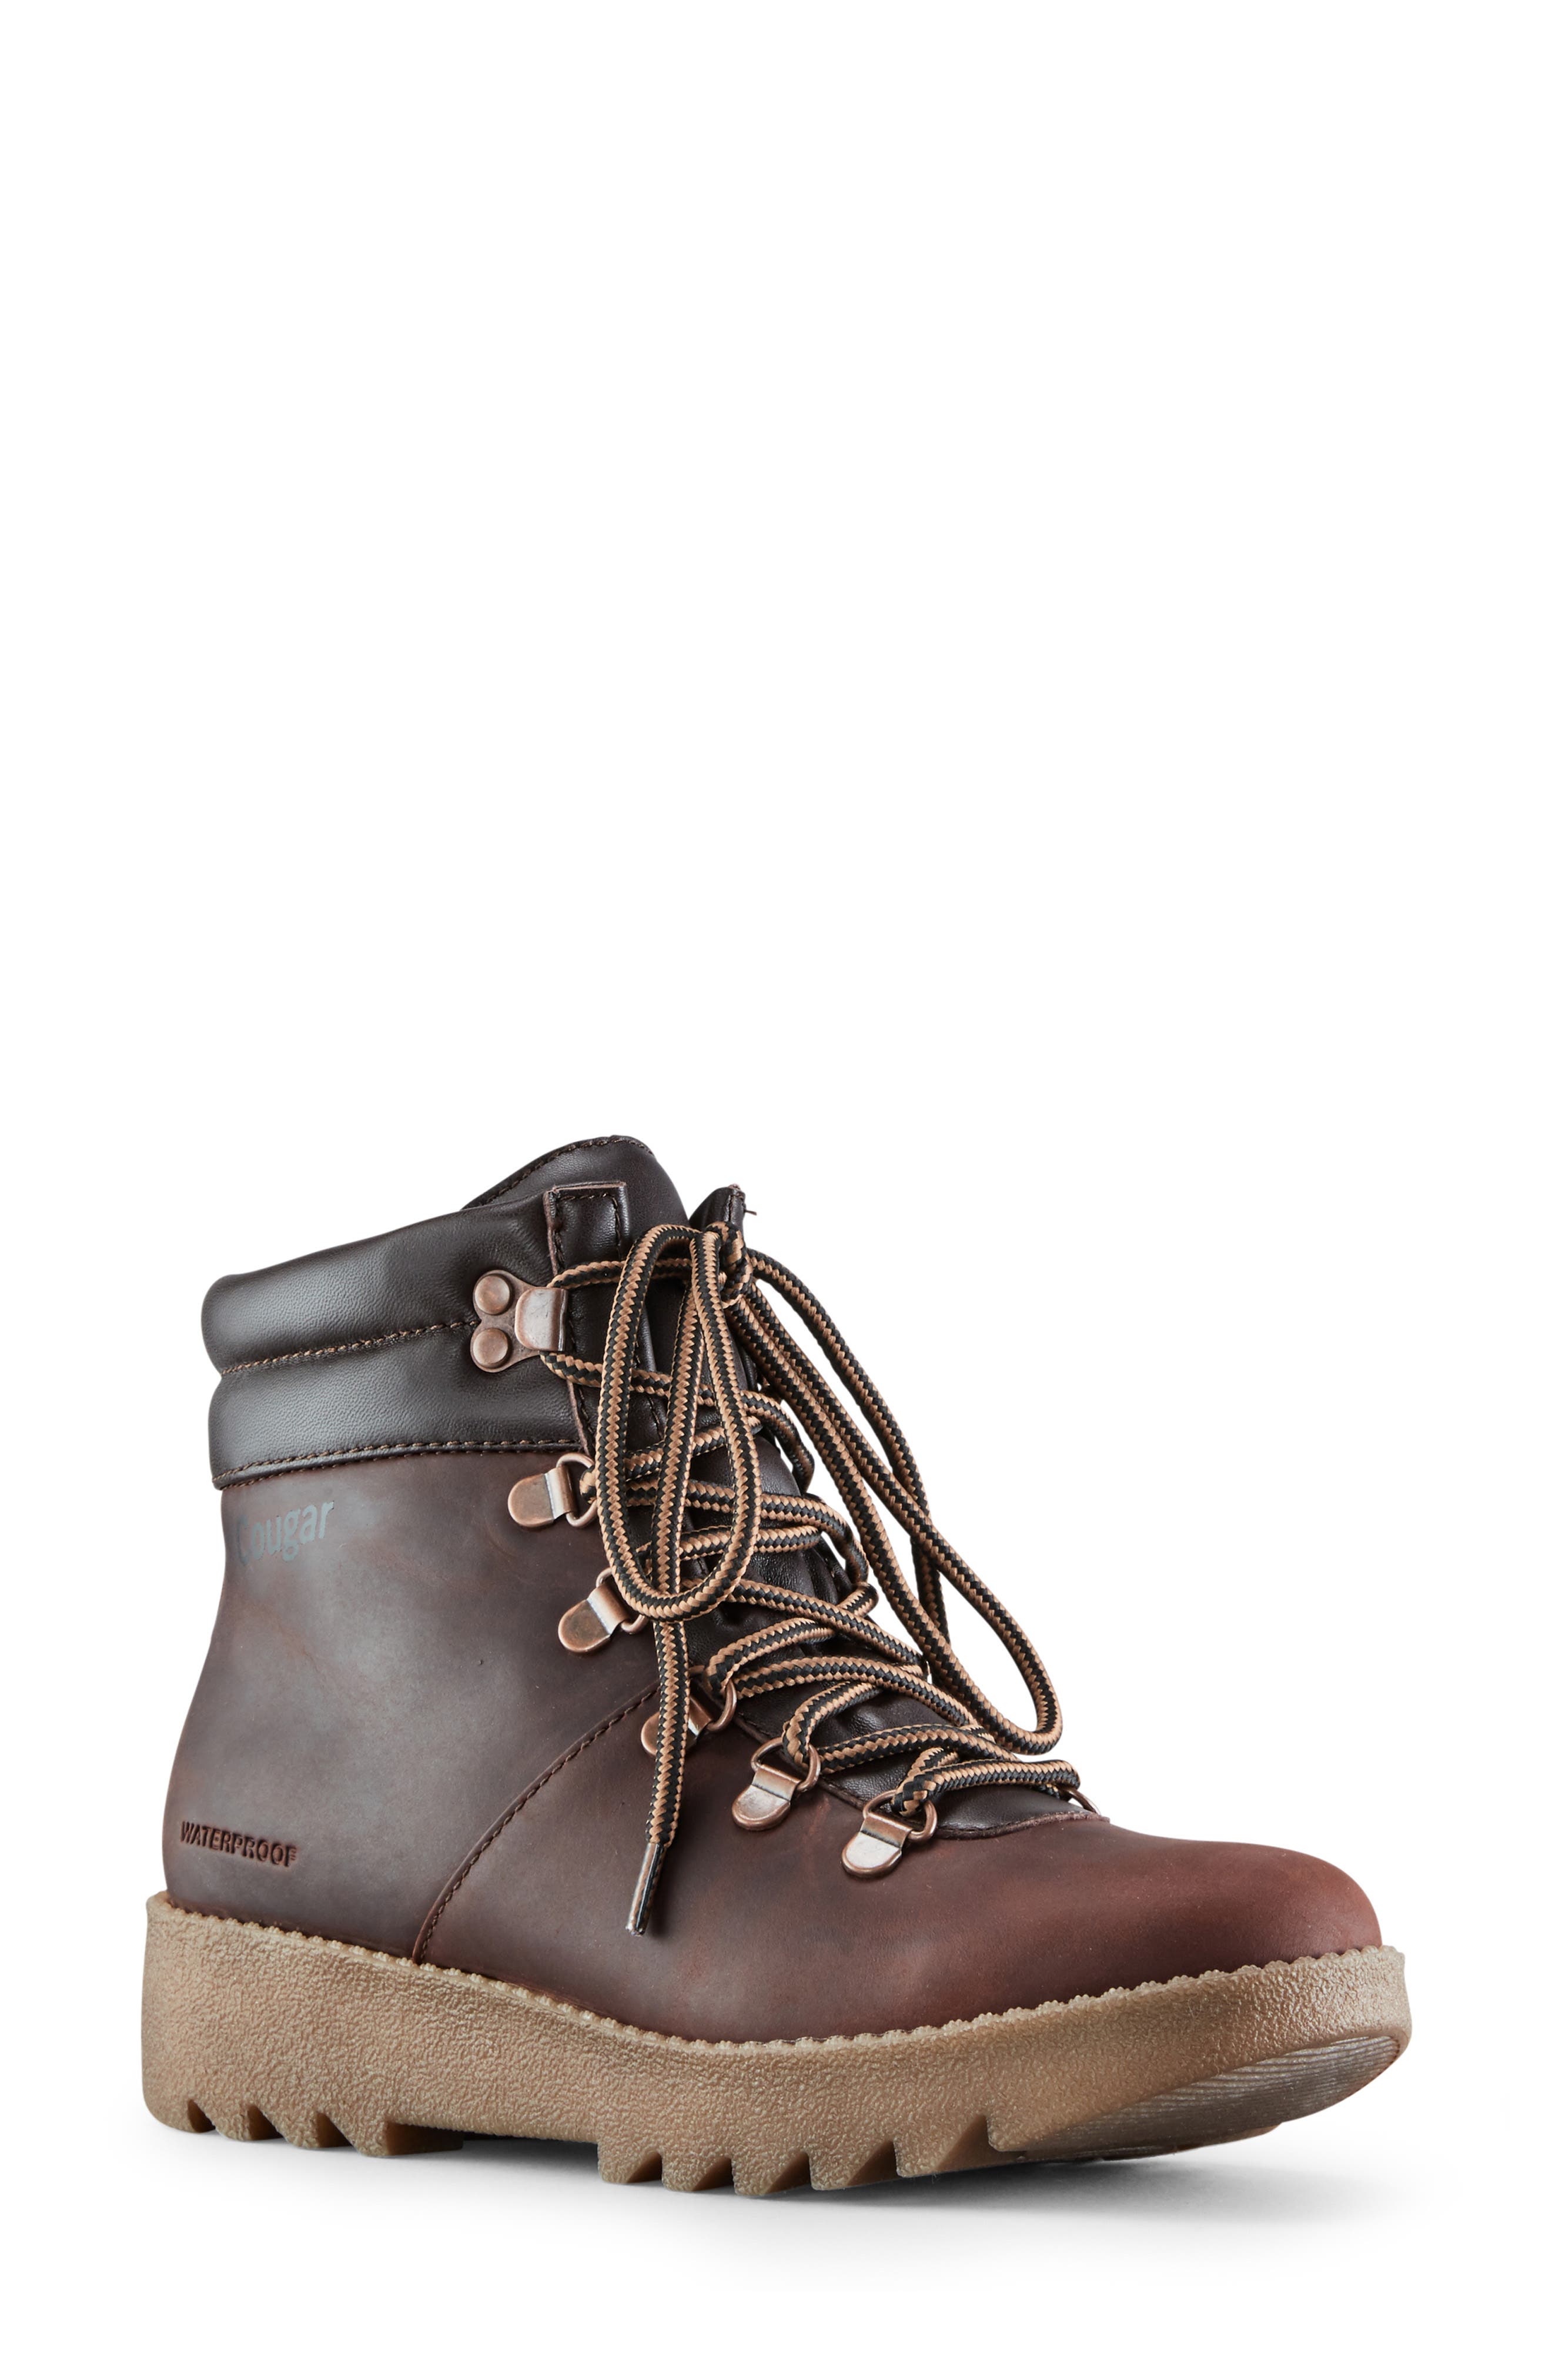 Women's Cougar Boots | Nordstrom